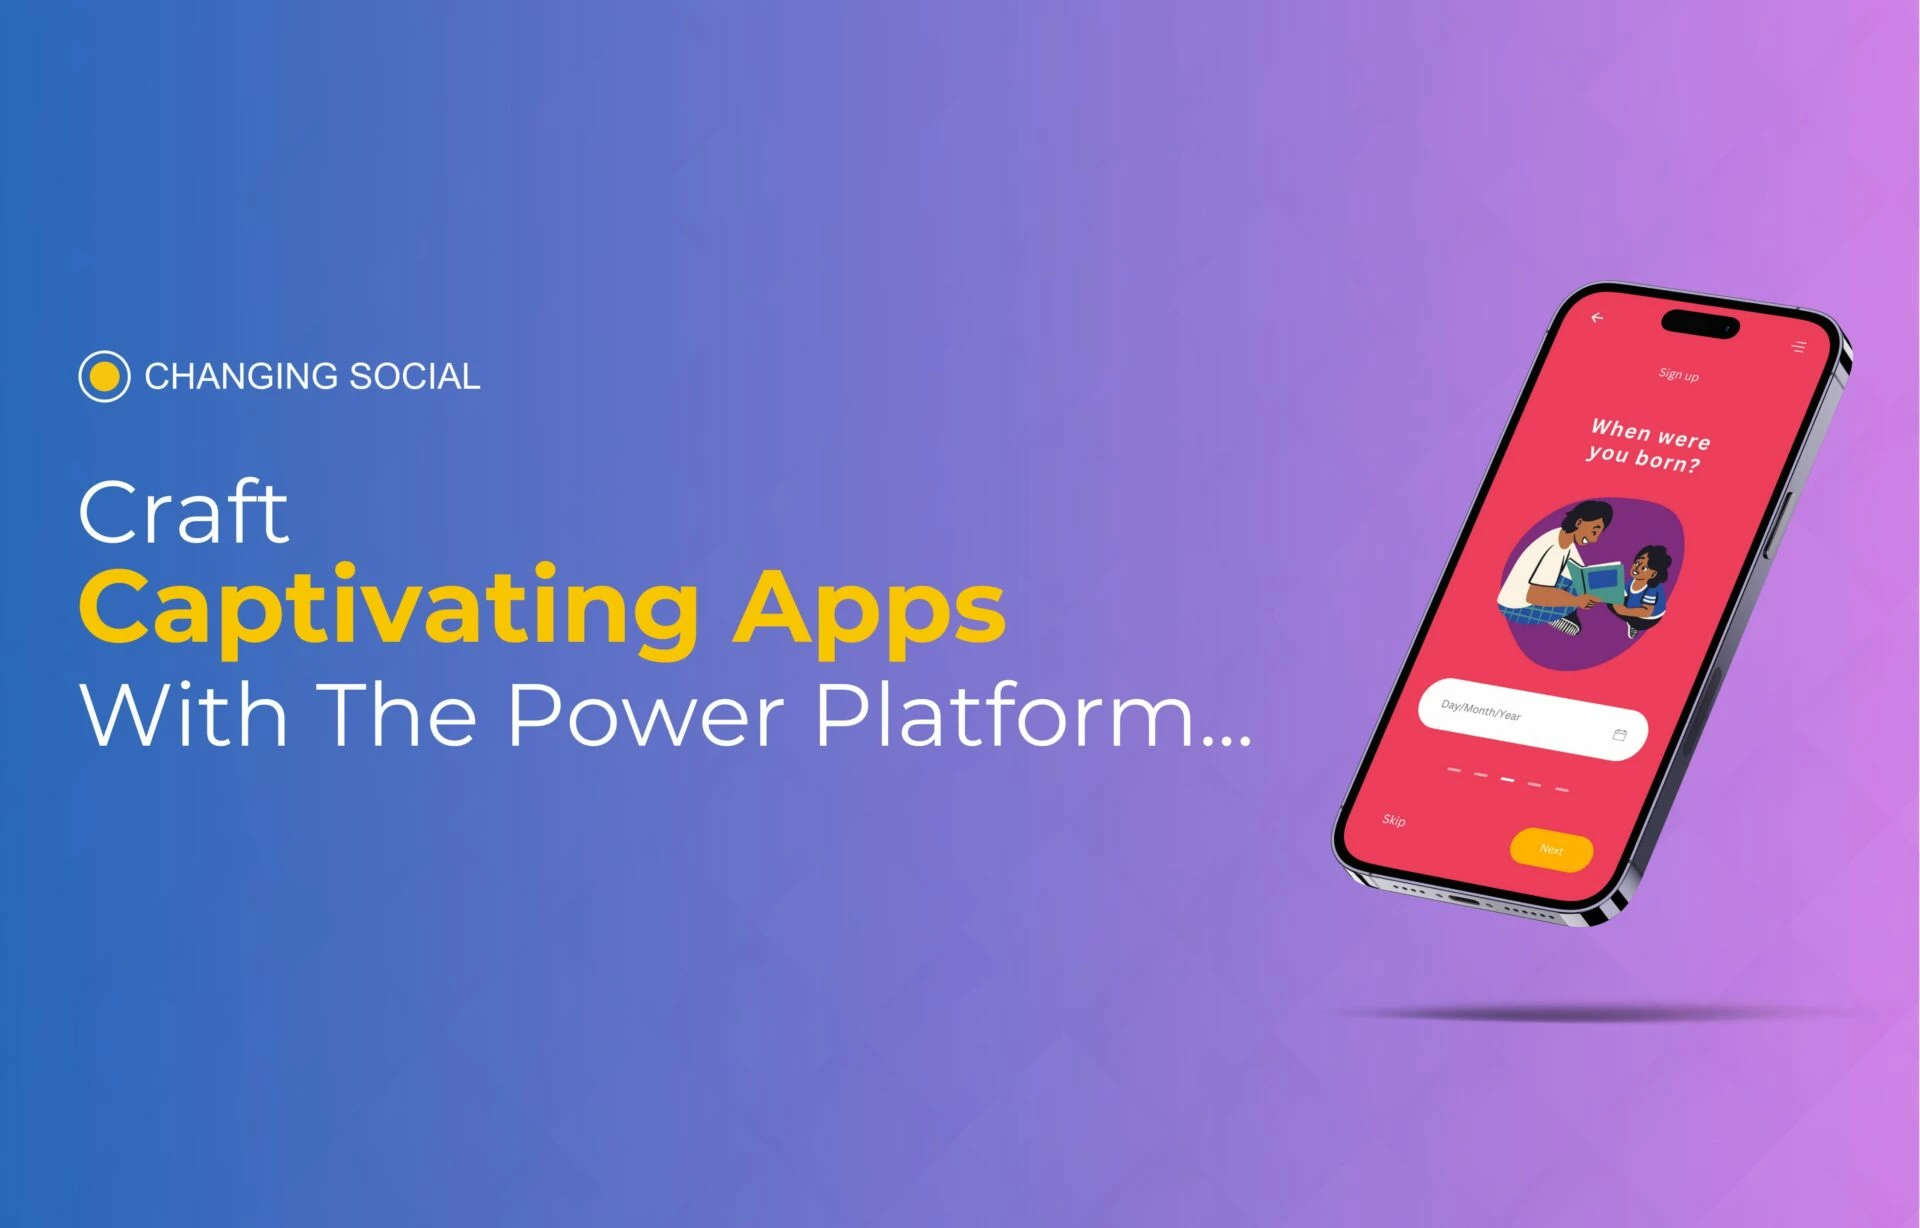 Craft Captivating Apps with Power Platform